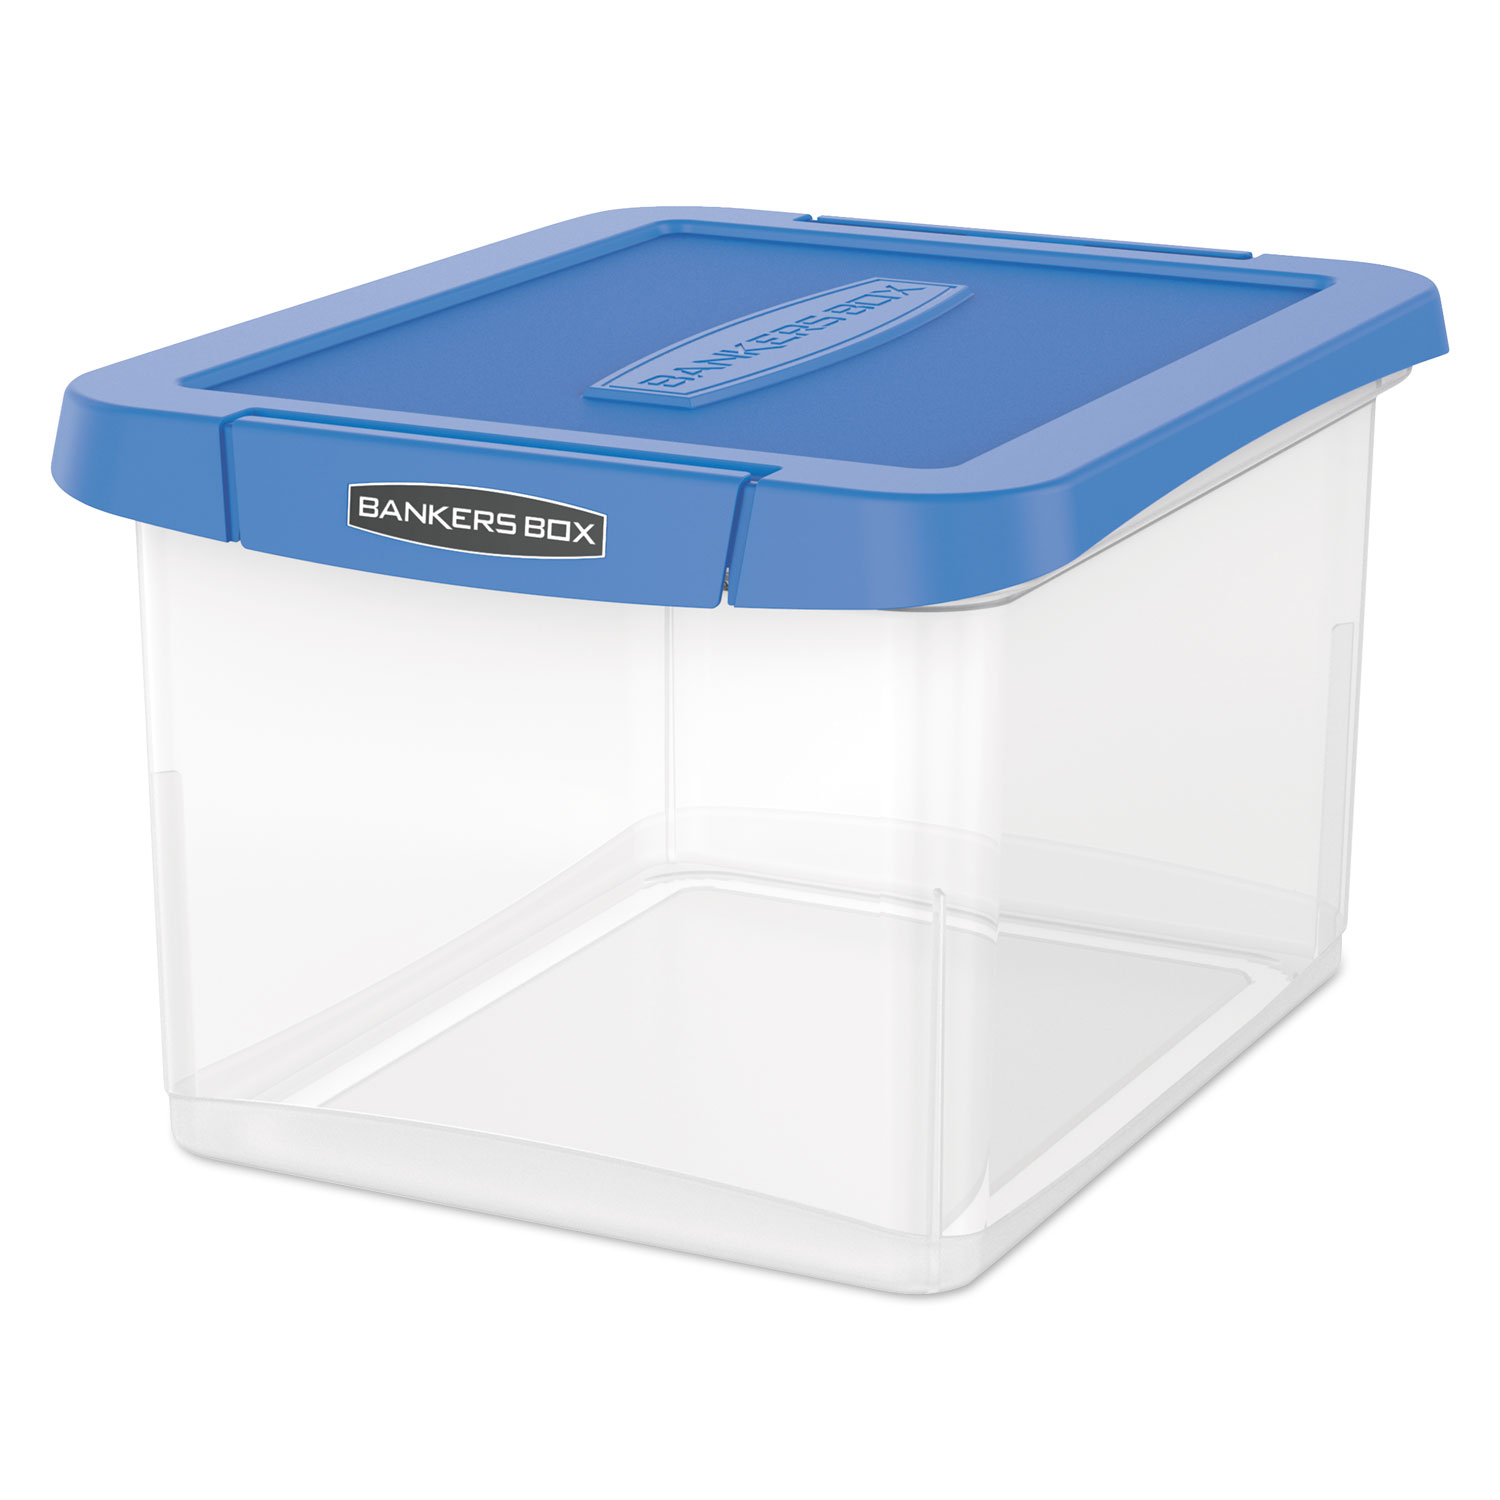  Bankers Box 0086202 Heavy Duty Plastic File Storage, Letter/Legal Files, 14 x 17.38 x 10.5, Clear/Blue, 2/Pack (FEL0086202) 